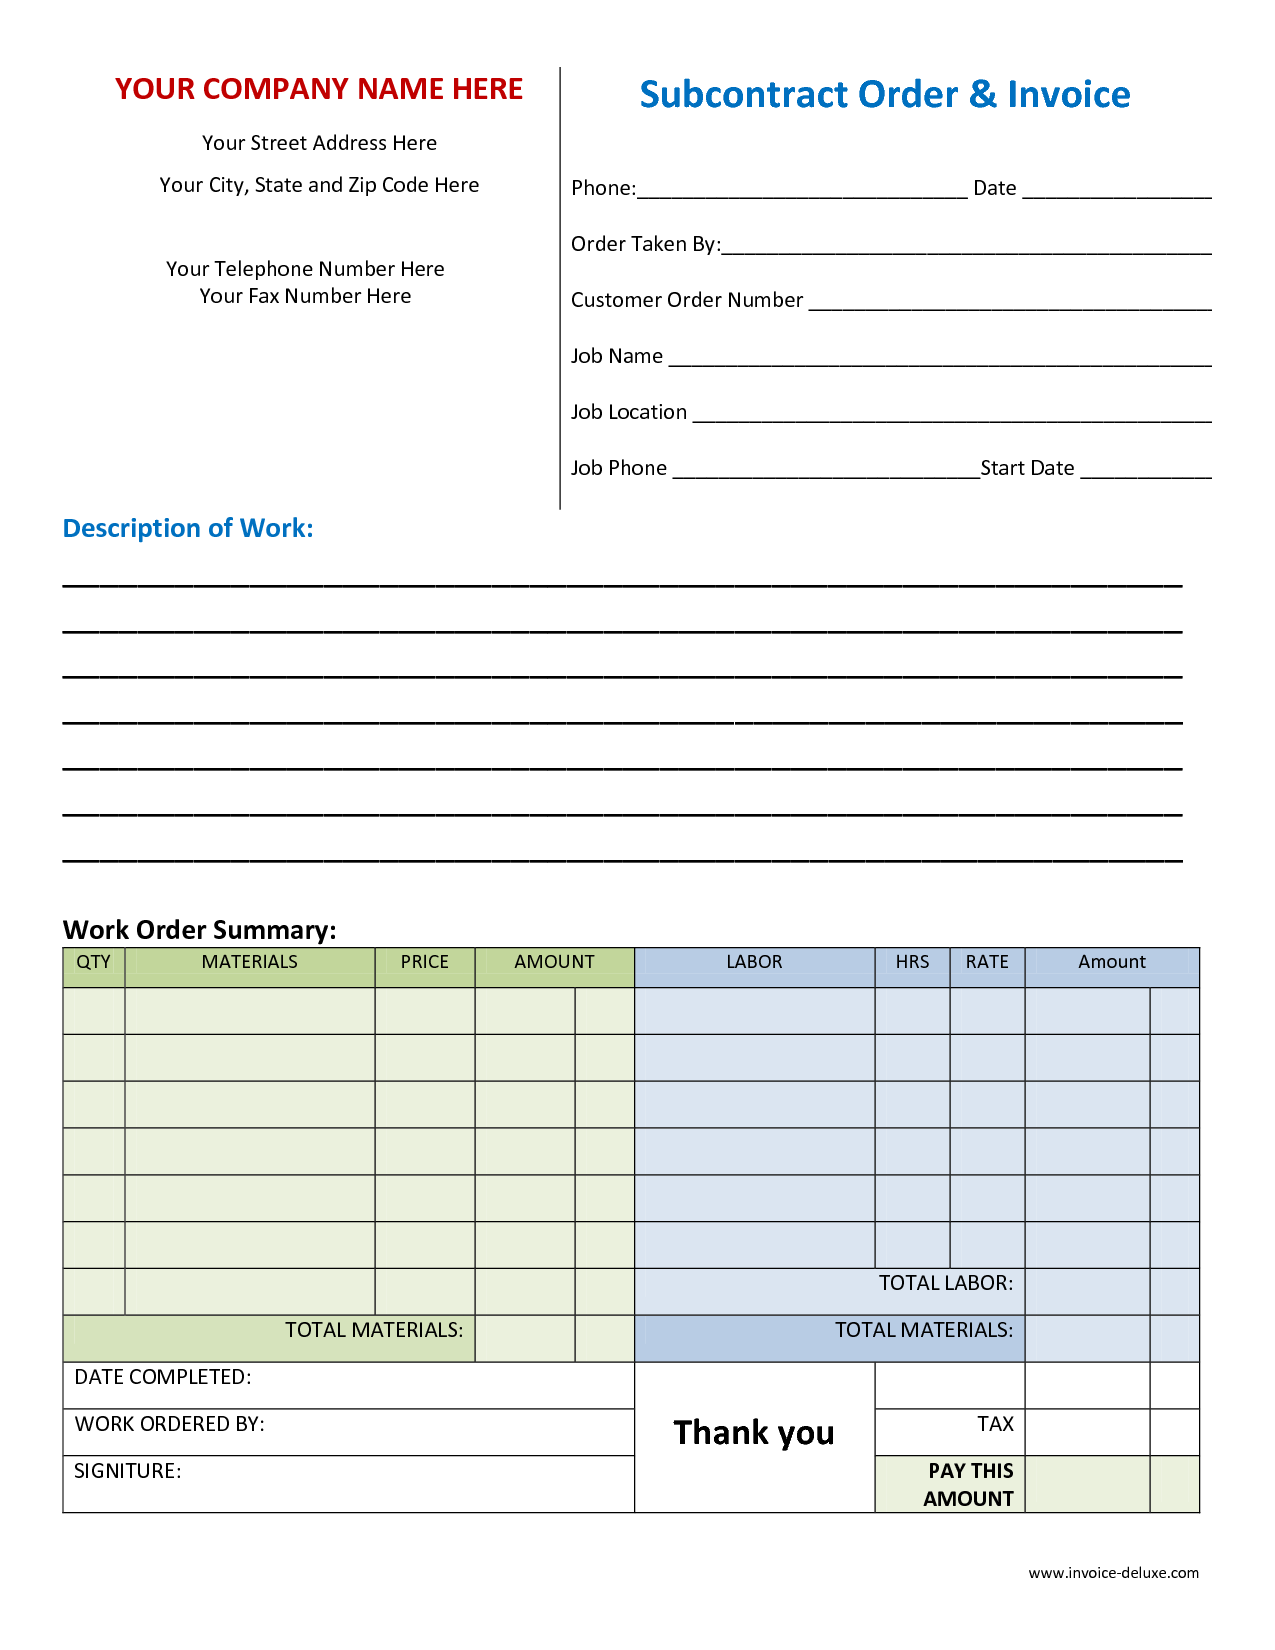 Free Resources and Timesheet Templates Harvest